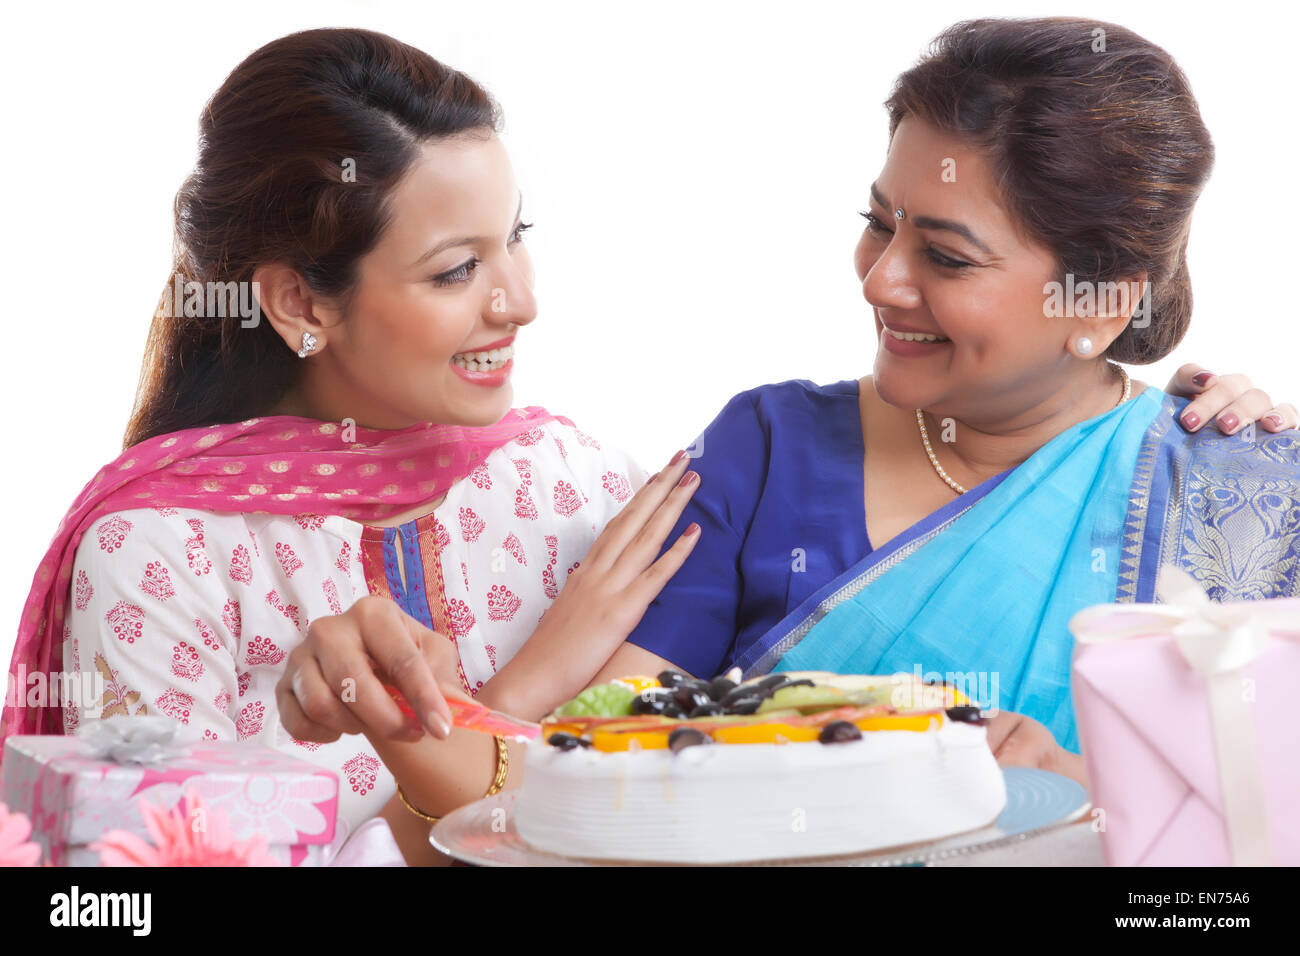 Mother and daughter with birthday cake Stock Photo